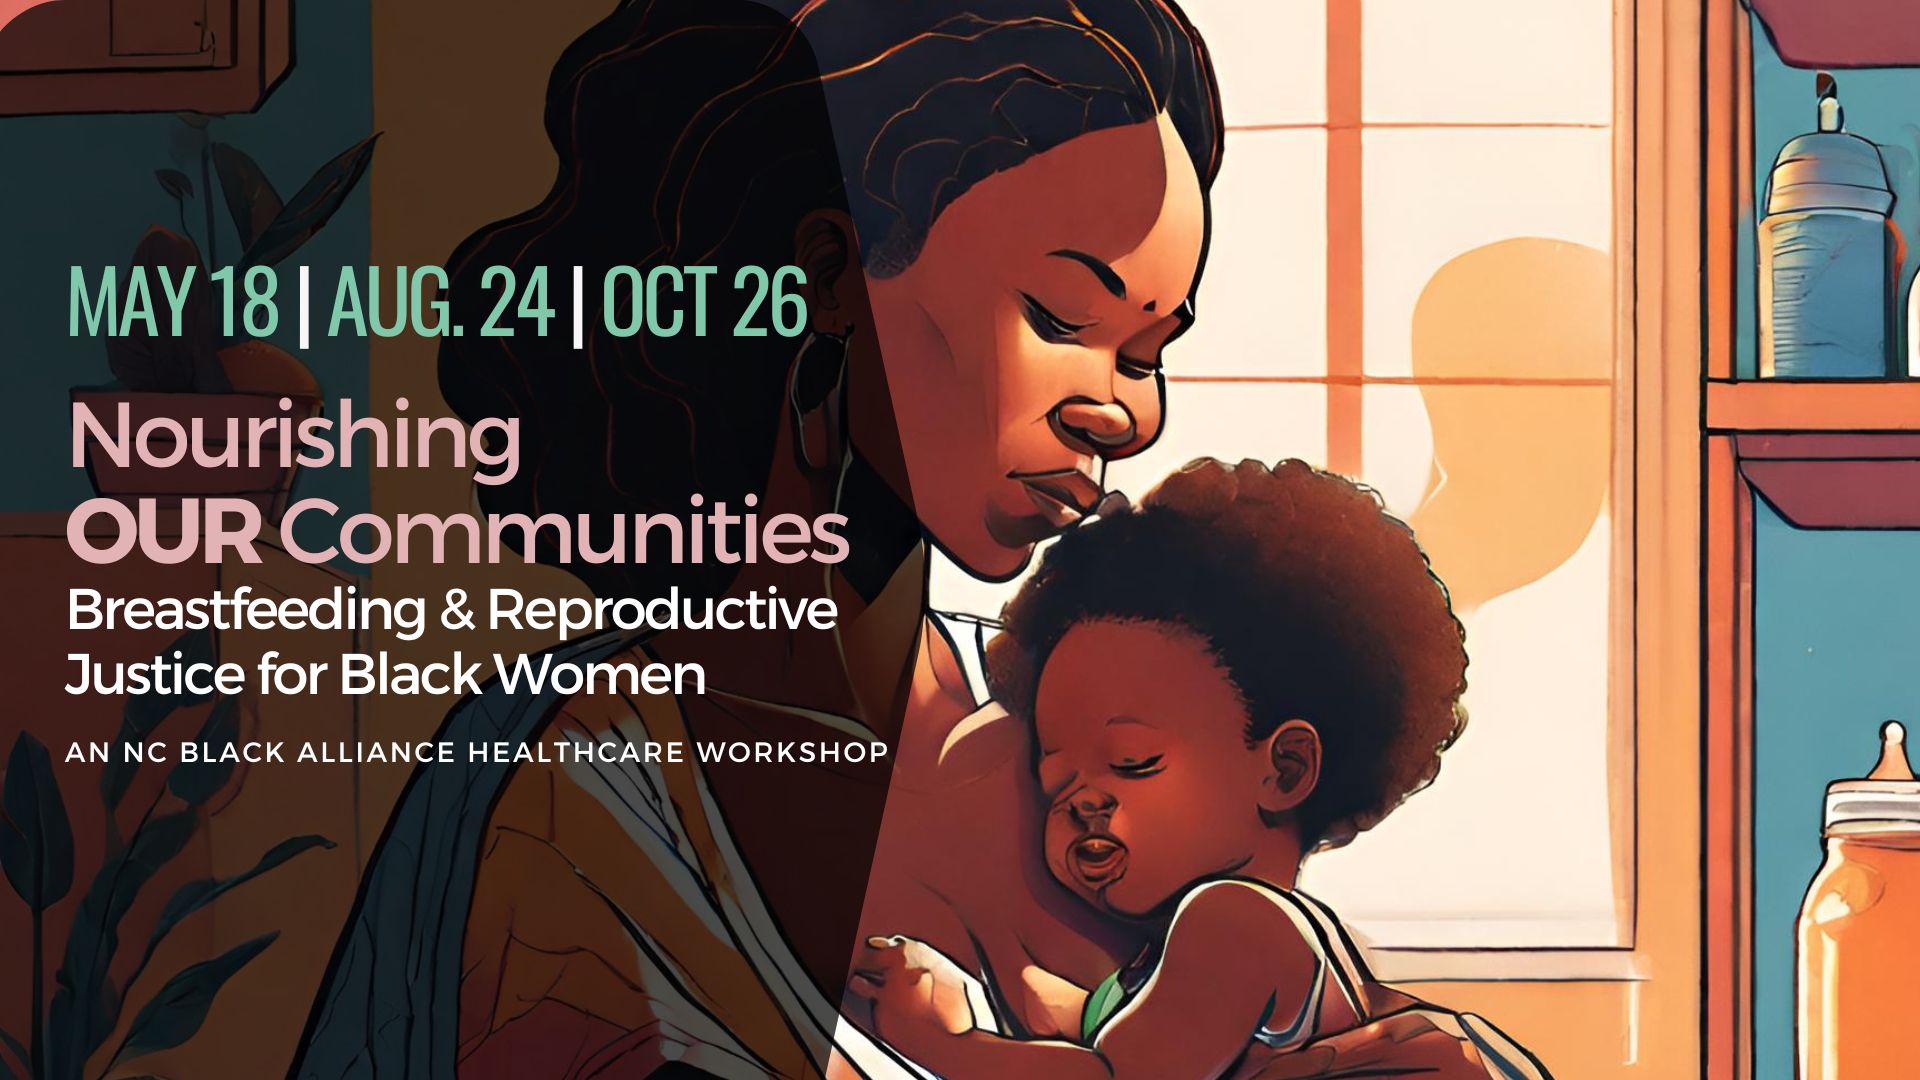 Breastfeeding & Reproductive Justice for Black Women workshop